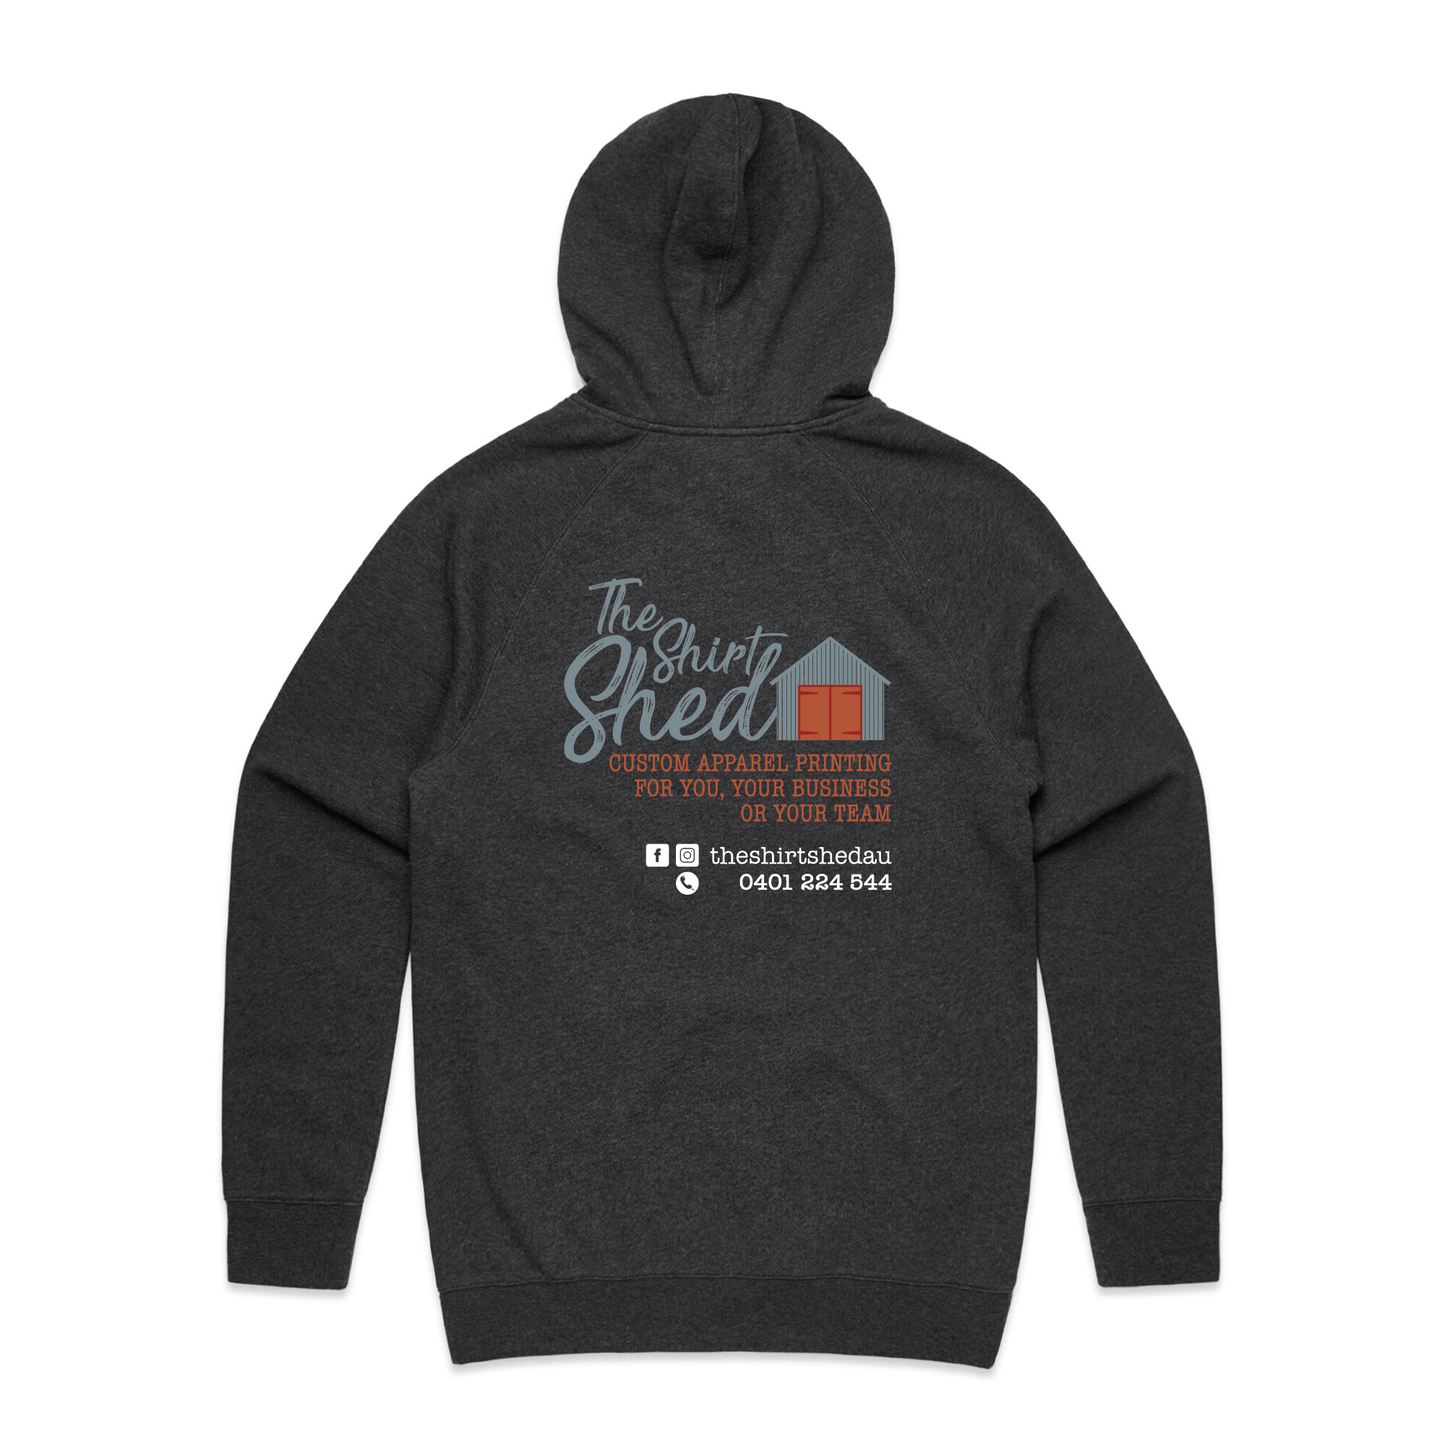 The Shirt Shed Adult Hoodies